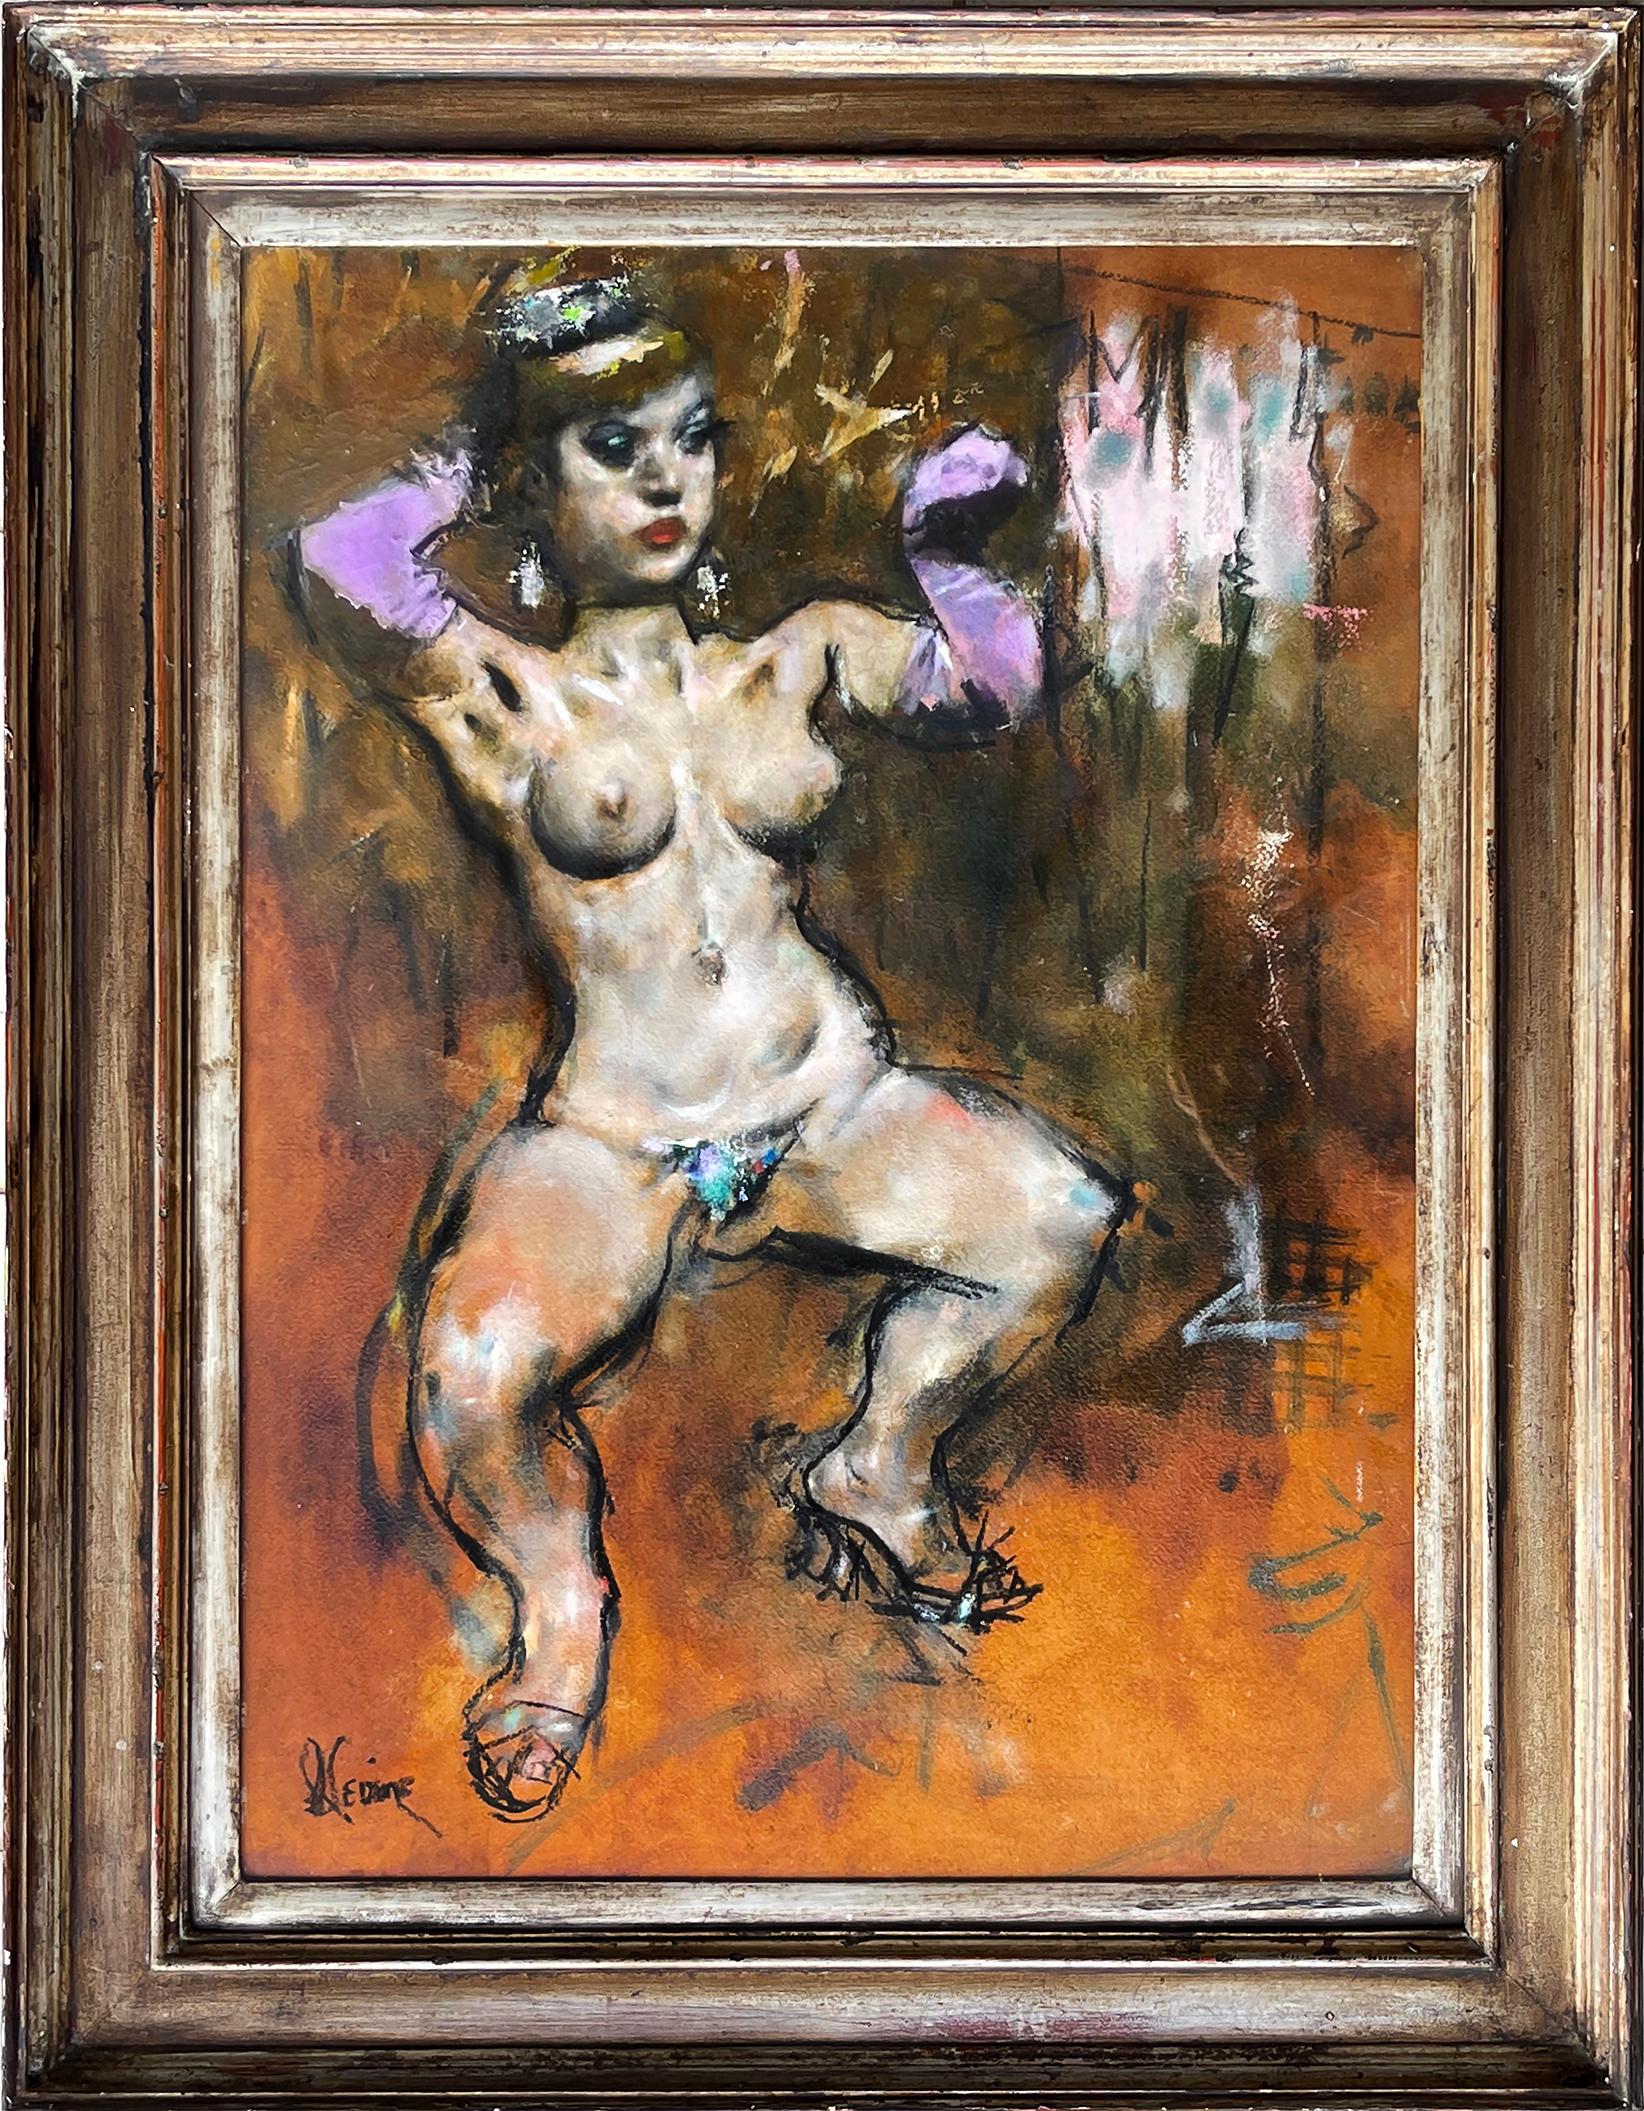 Nude Dancer Burlesque Stripper with Purple Gloves  - The Bump -  - Painting by Jack Levine